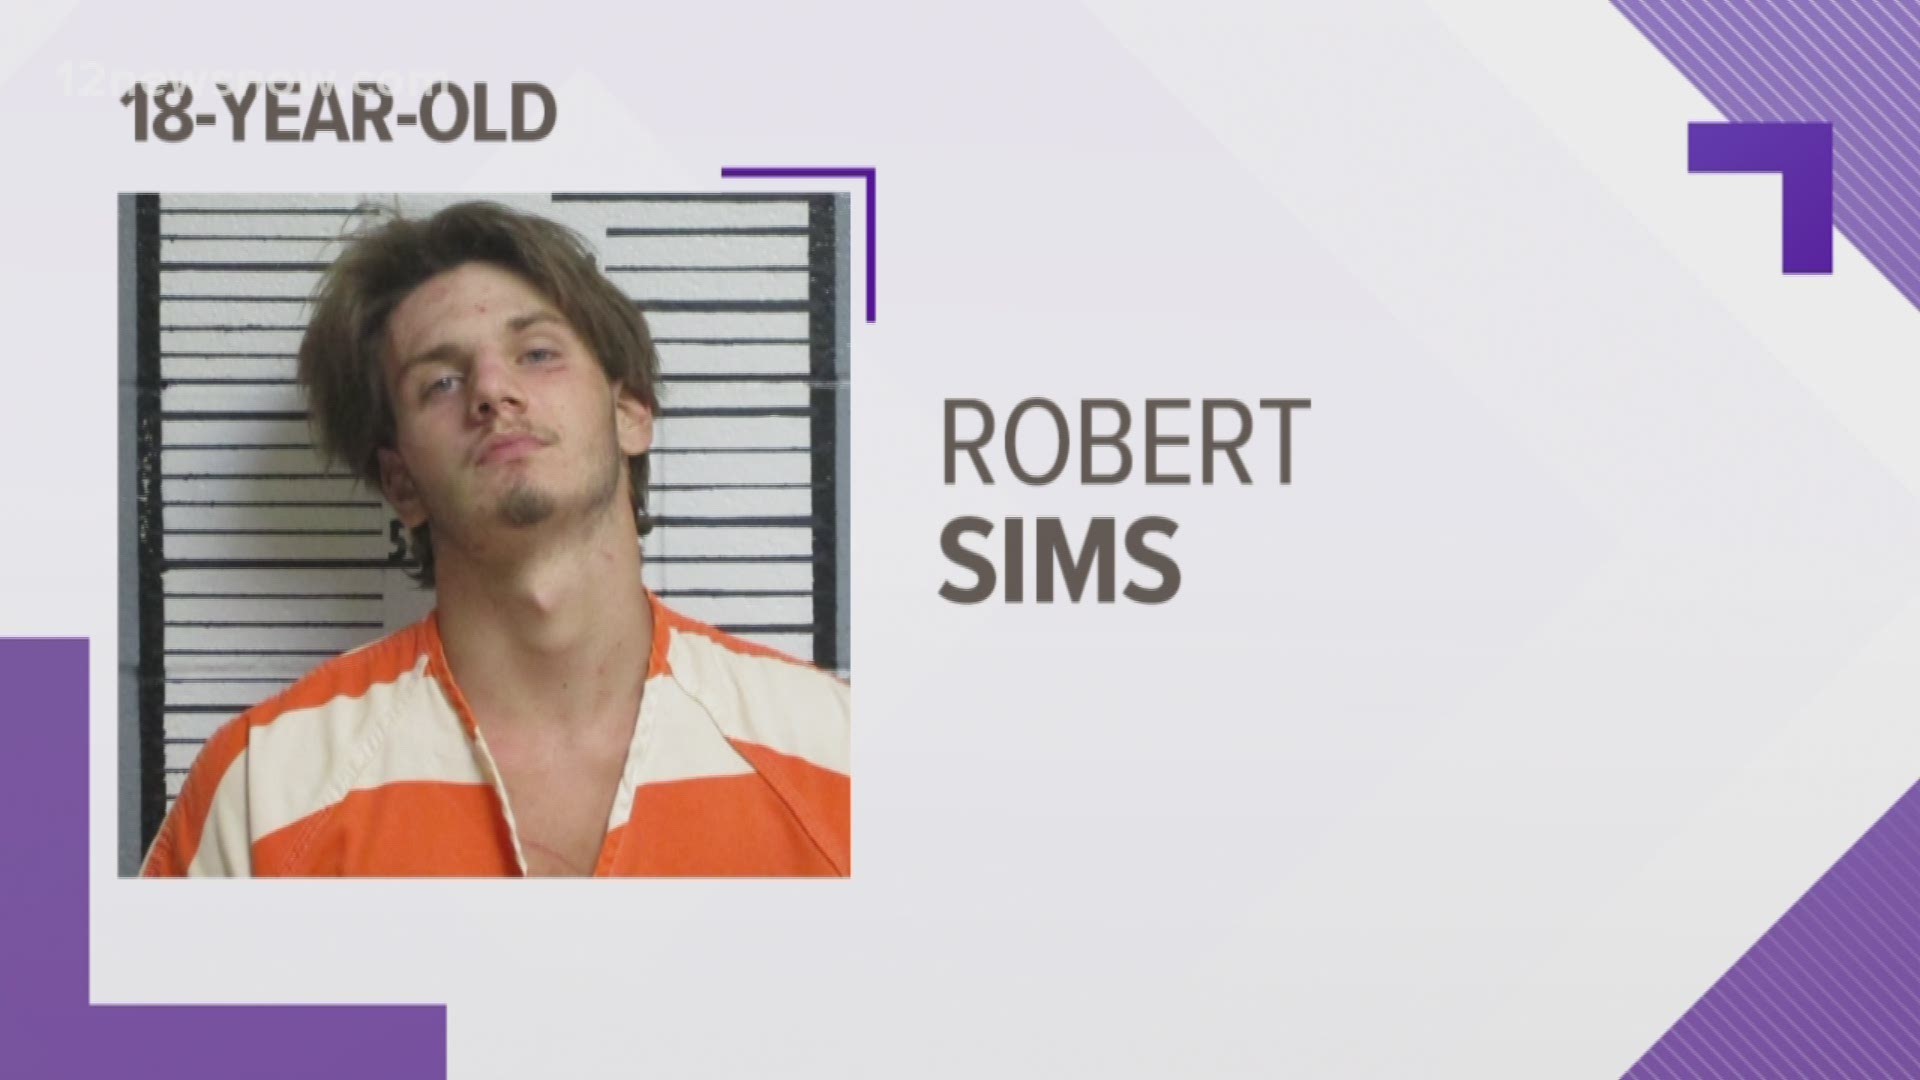 Robert Sims is held in the Tyler County Jail on a $200,000 bond.